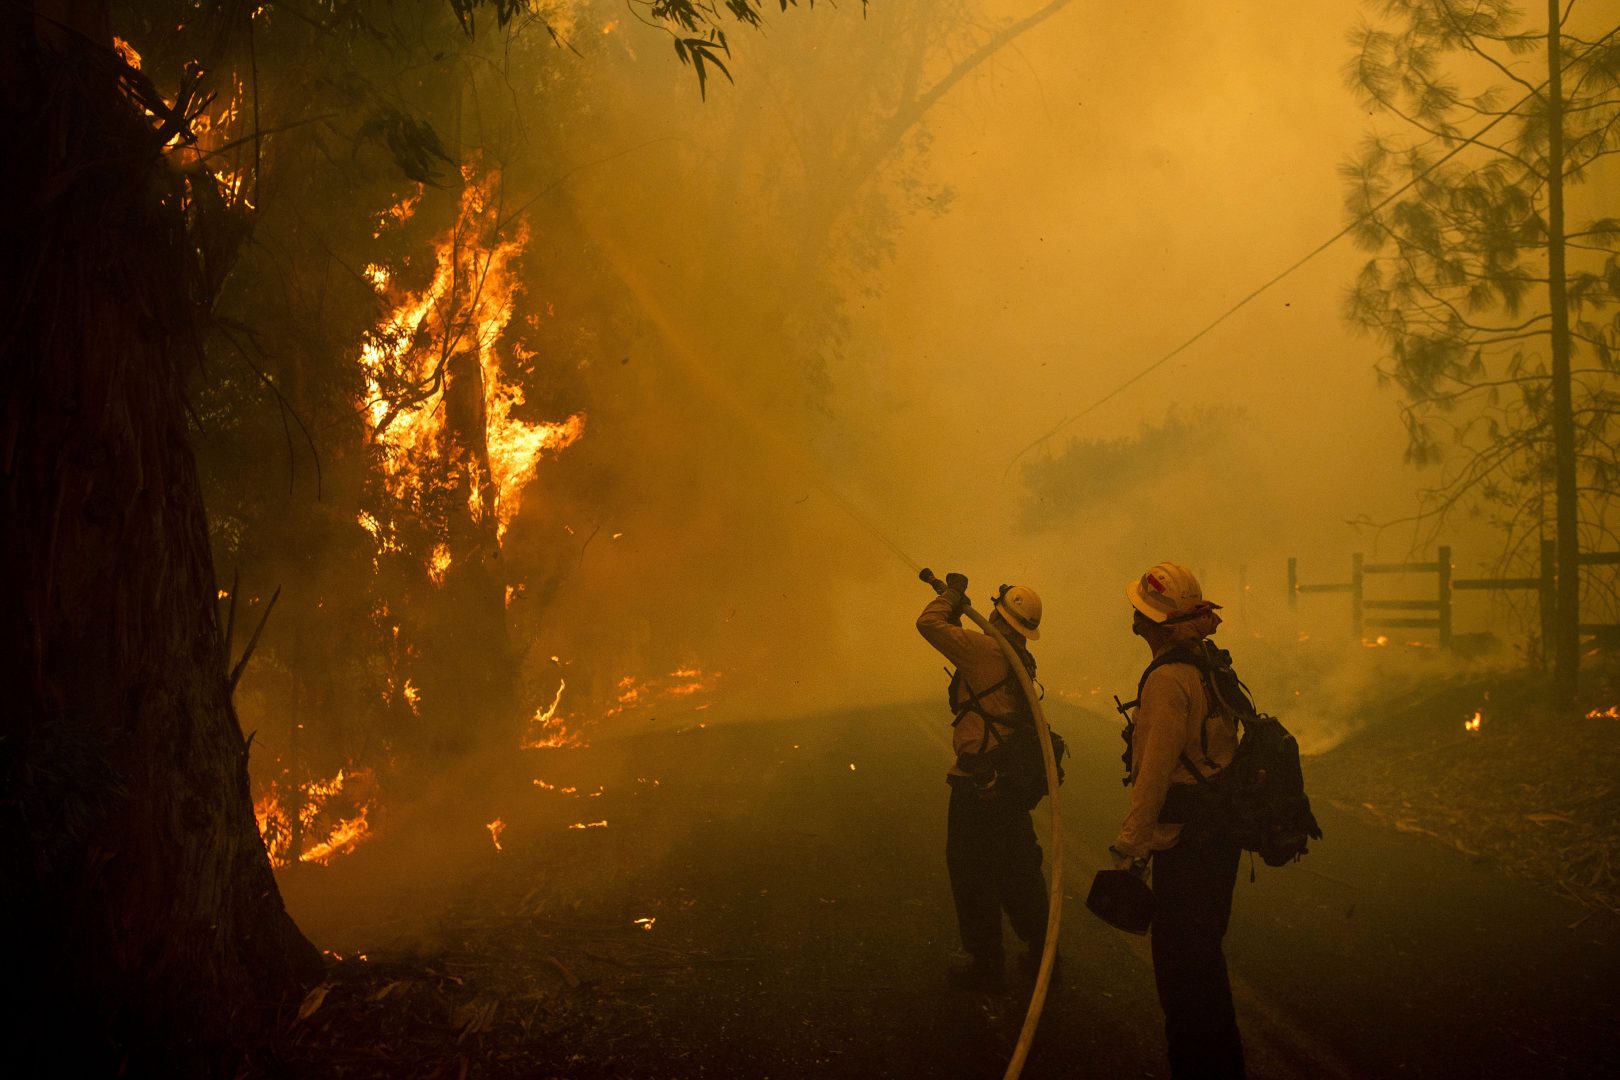 Firefighters battle a wildfire called the Kincade Fire on Chalk Hill Road in Healdsburg, Calif., Sunday, Oct. 27, 2019.